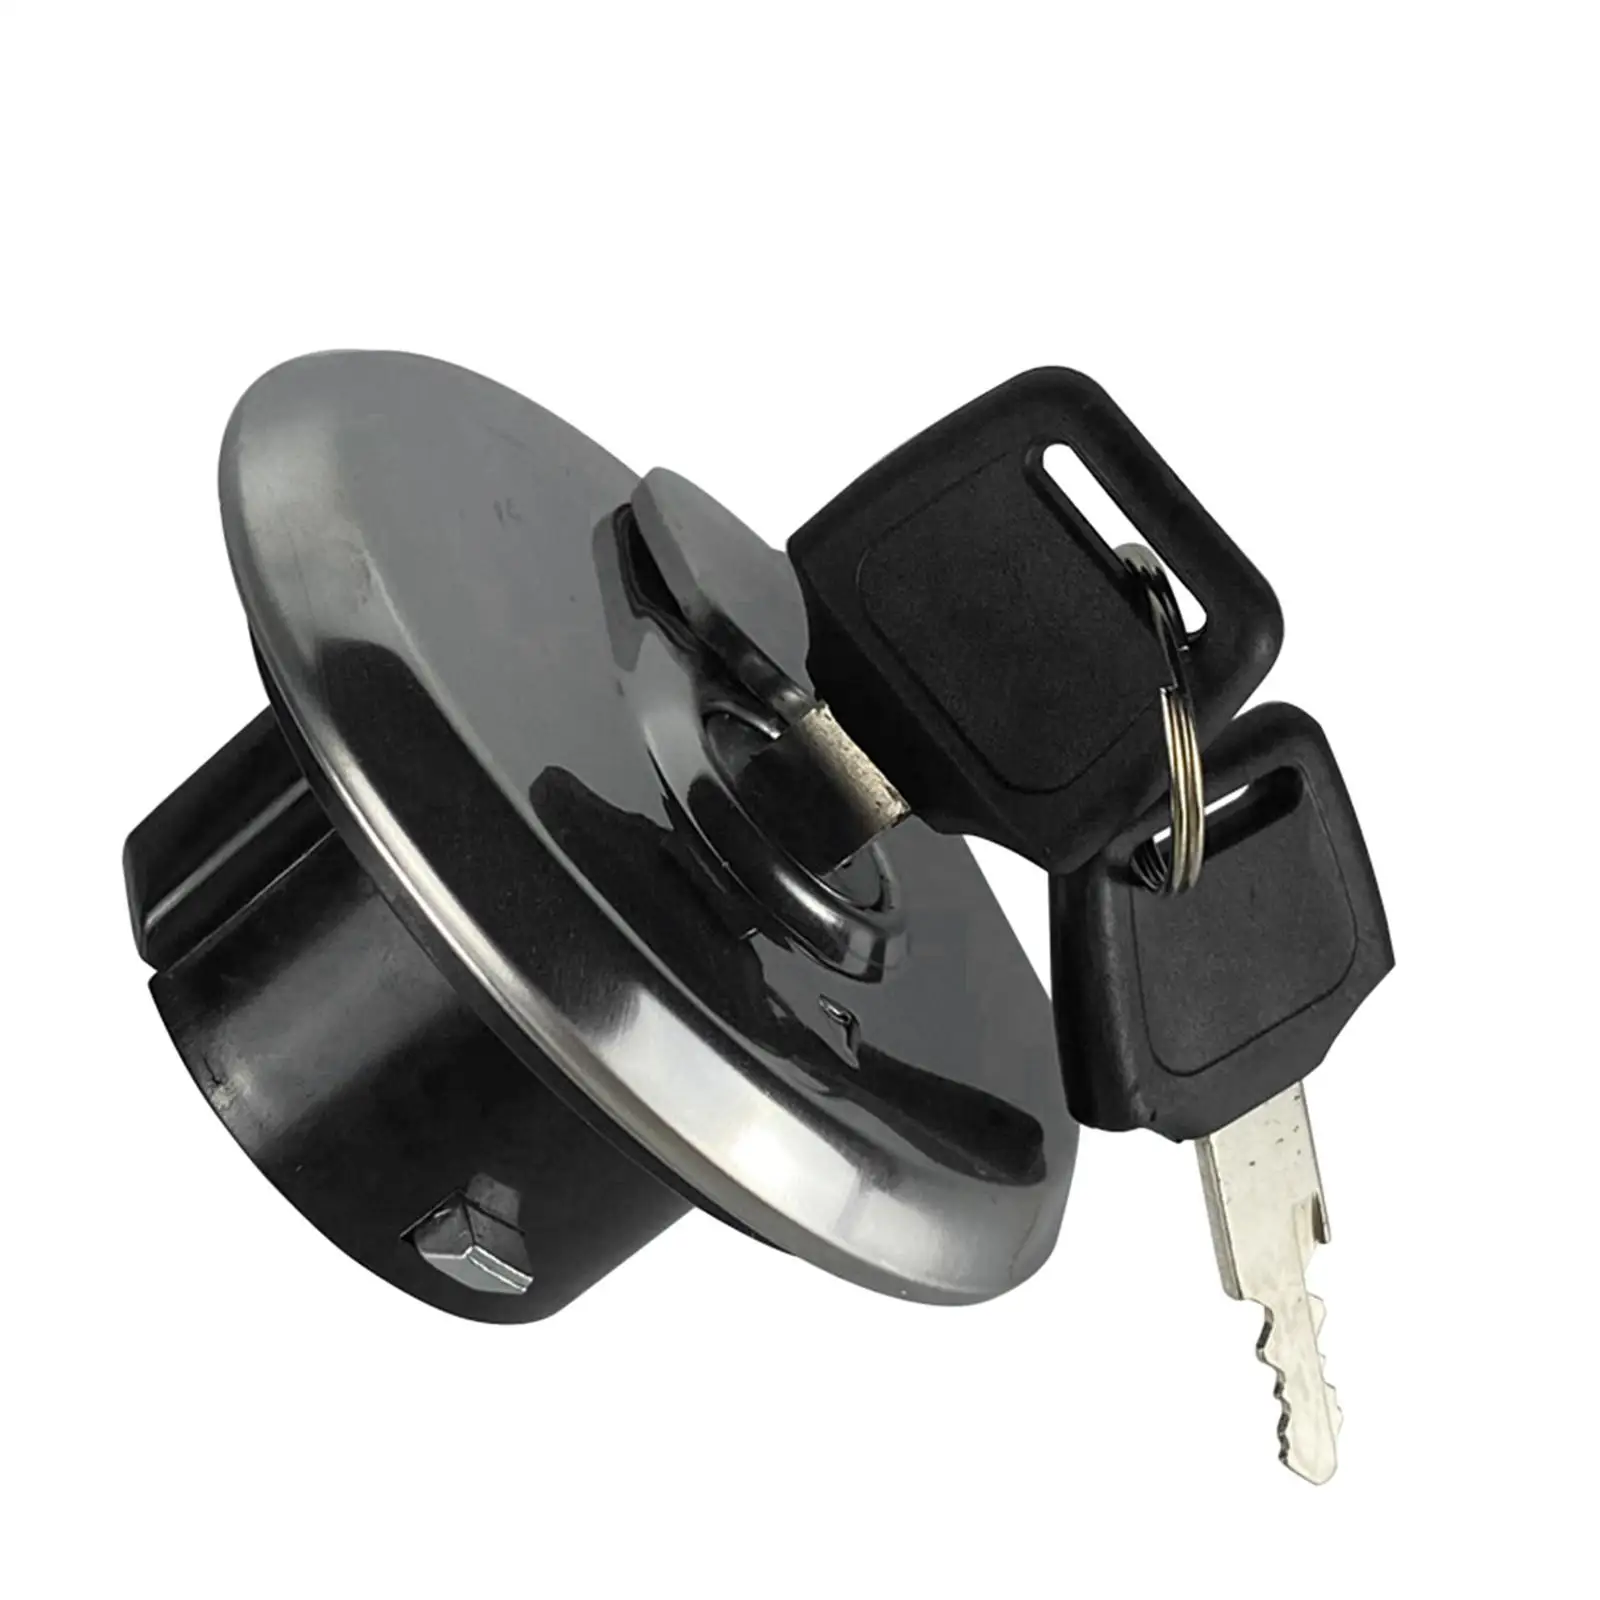 Motorcycle Fuel Gas Tank Cap Cover with Lock Keys for Suzuki Gn125